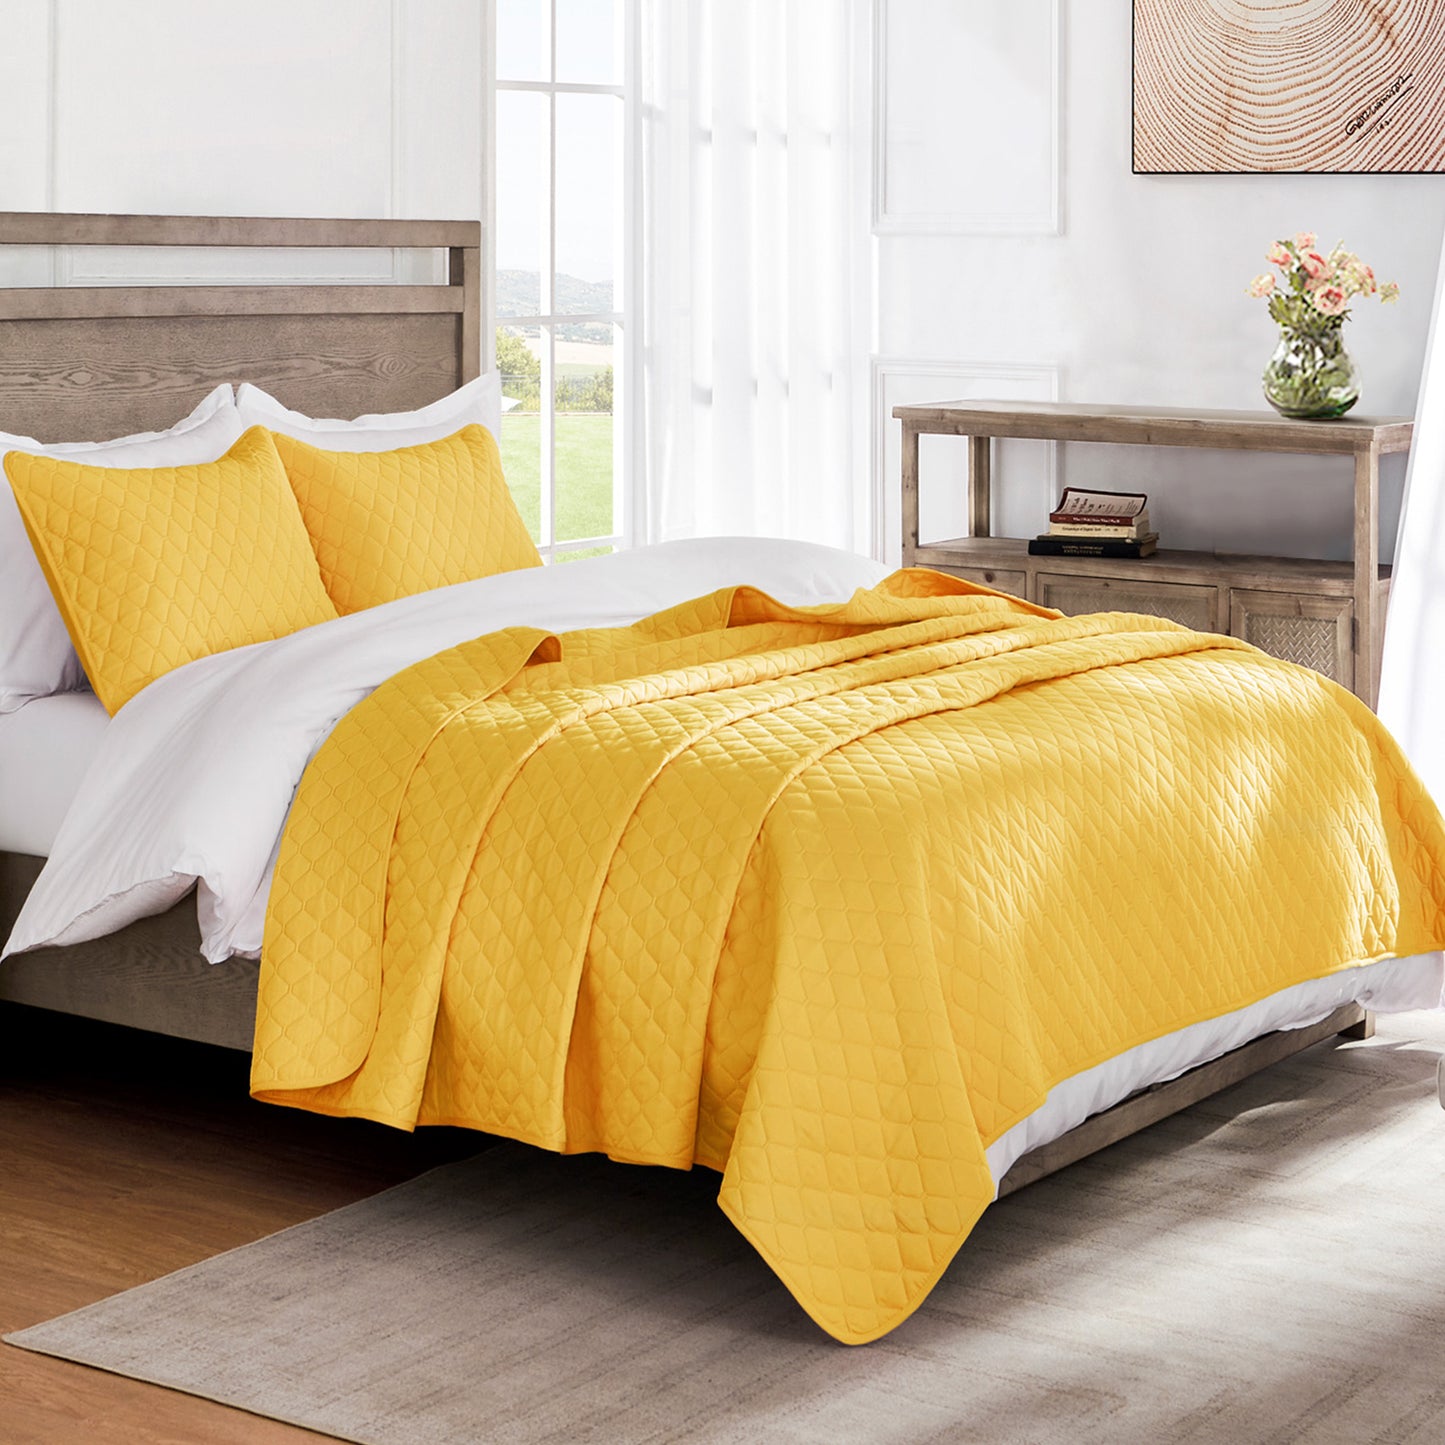 Exclusivo Mezcla Ultrasonic Reversible Twin Quilt Bedding Set with Pillow Sham, Lightweight Quilts Twin Size, Soft Bedspreads Bed Coverlets for All Seasons - (Bright Yellow, 68"x88")